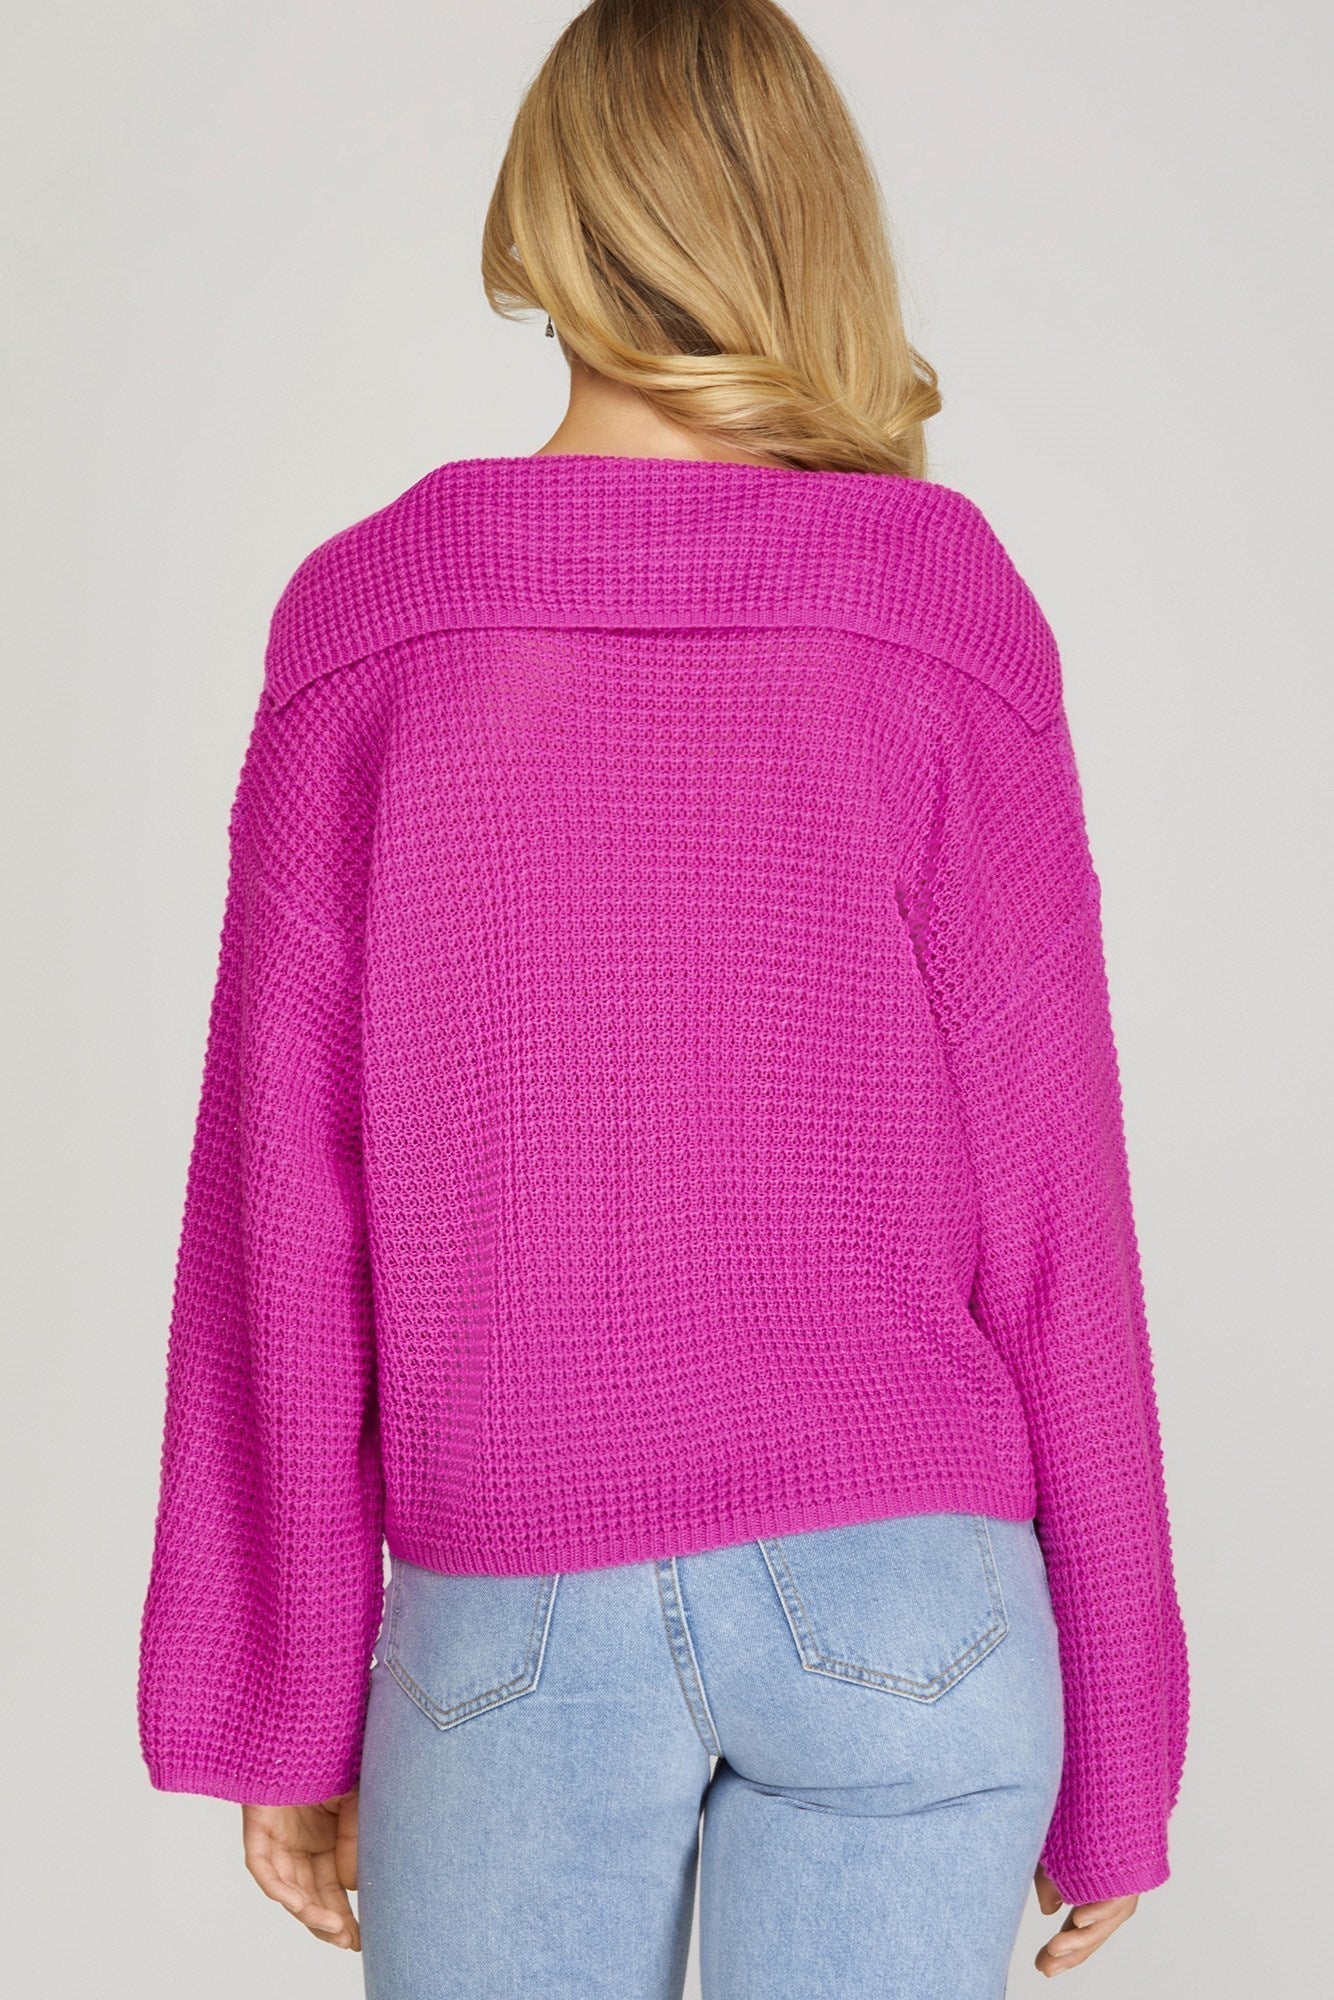 SHE AND SKY Women's Sweaters HOT PINK / S Long Sleeve Collared Sweater Top || David's Clothing SY5367